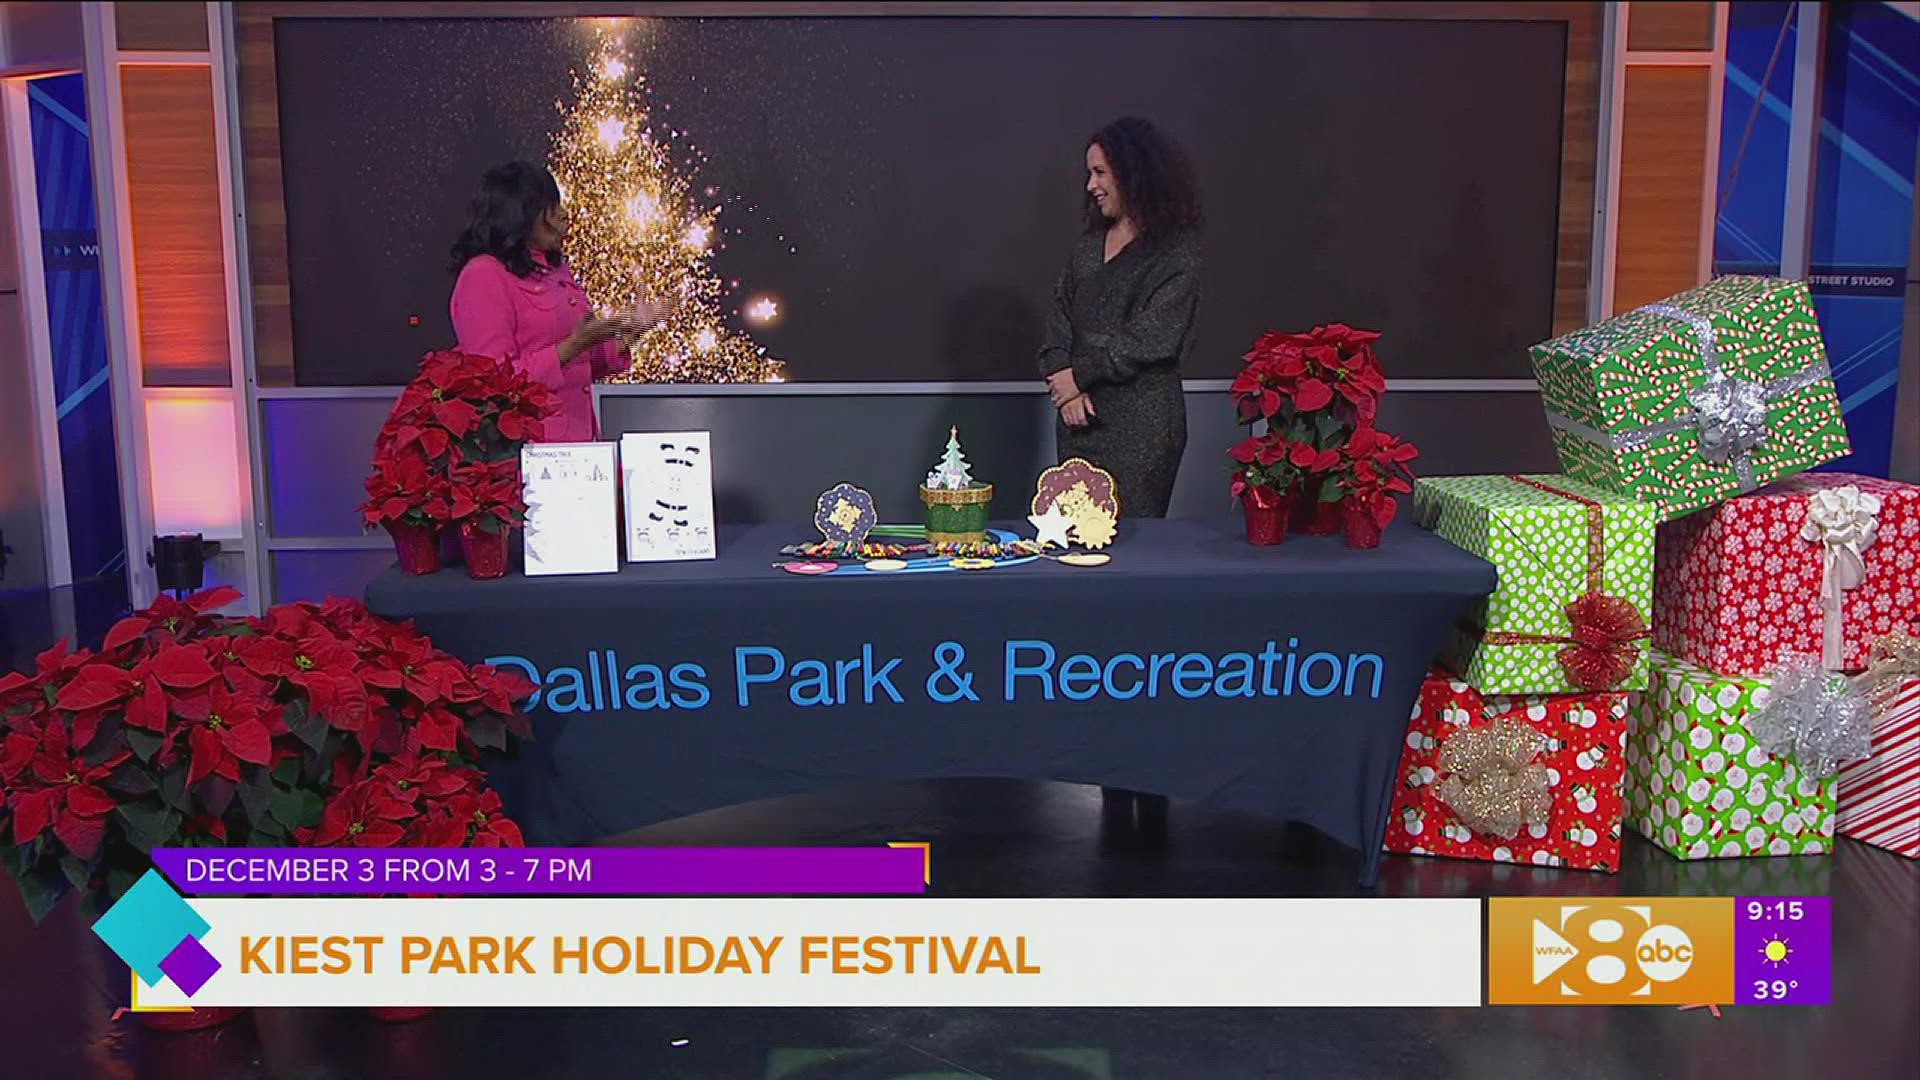 The City of Dallas is making it easier to experience the excitement of the season, by creating a new celebration called The Kiest Park Holiday Festival.